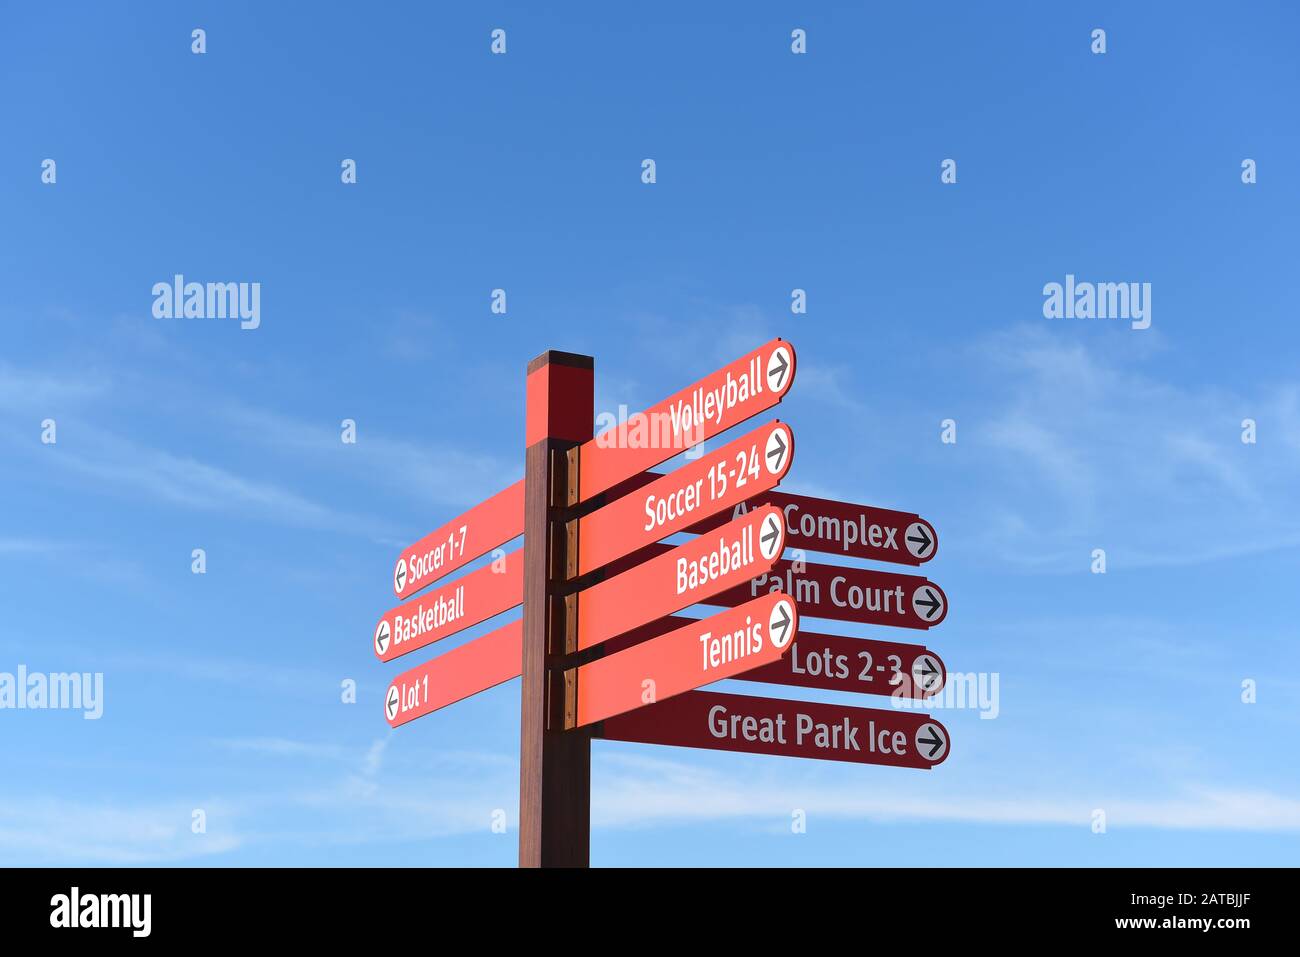 IRVINE, CALIFORNIA - 31 JAN 2020: Direction signs at the Orange County Great Park. Stock Photo